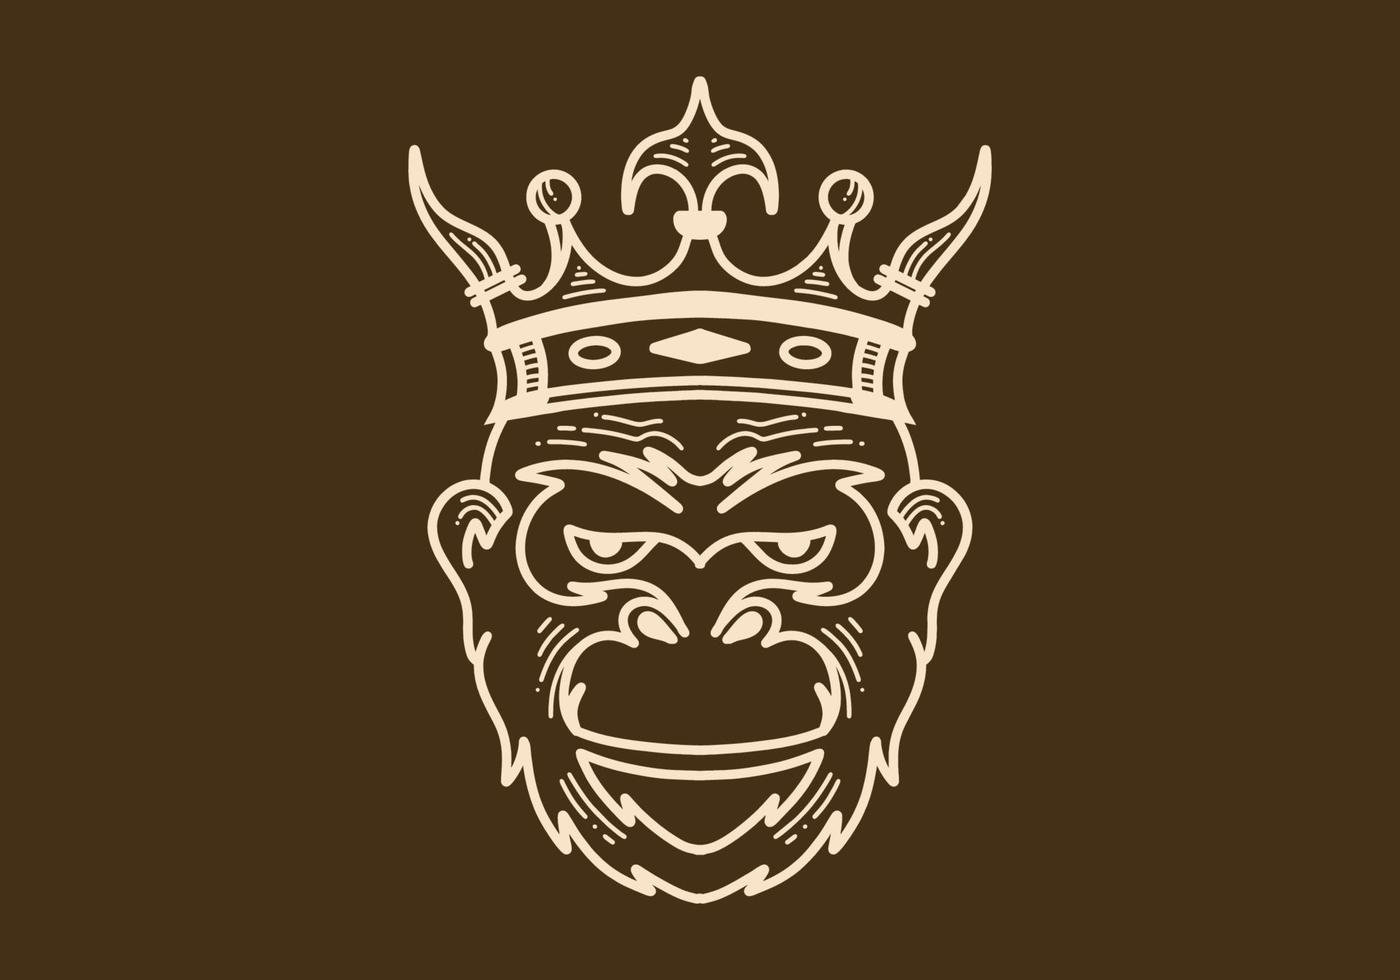 Vintage art illustration of a apes head wearing crown vector